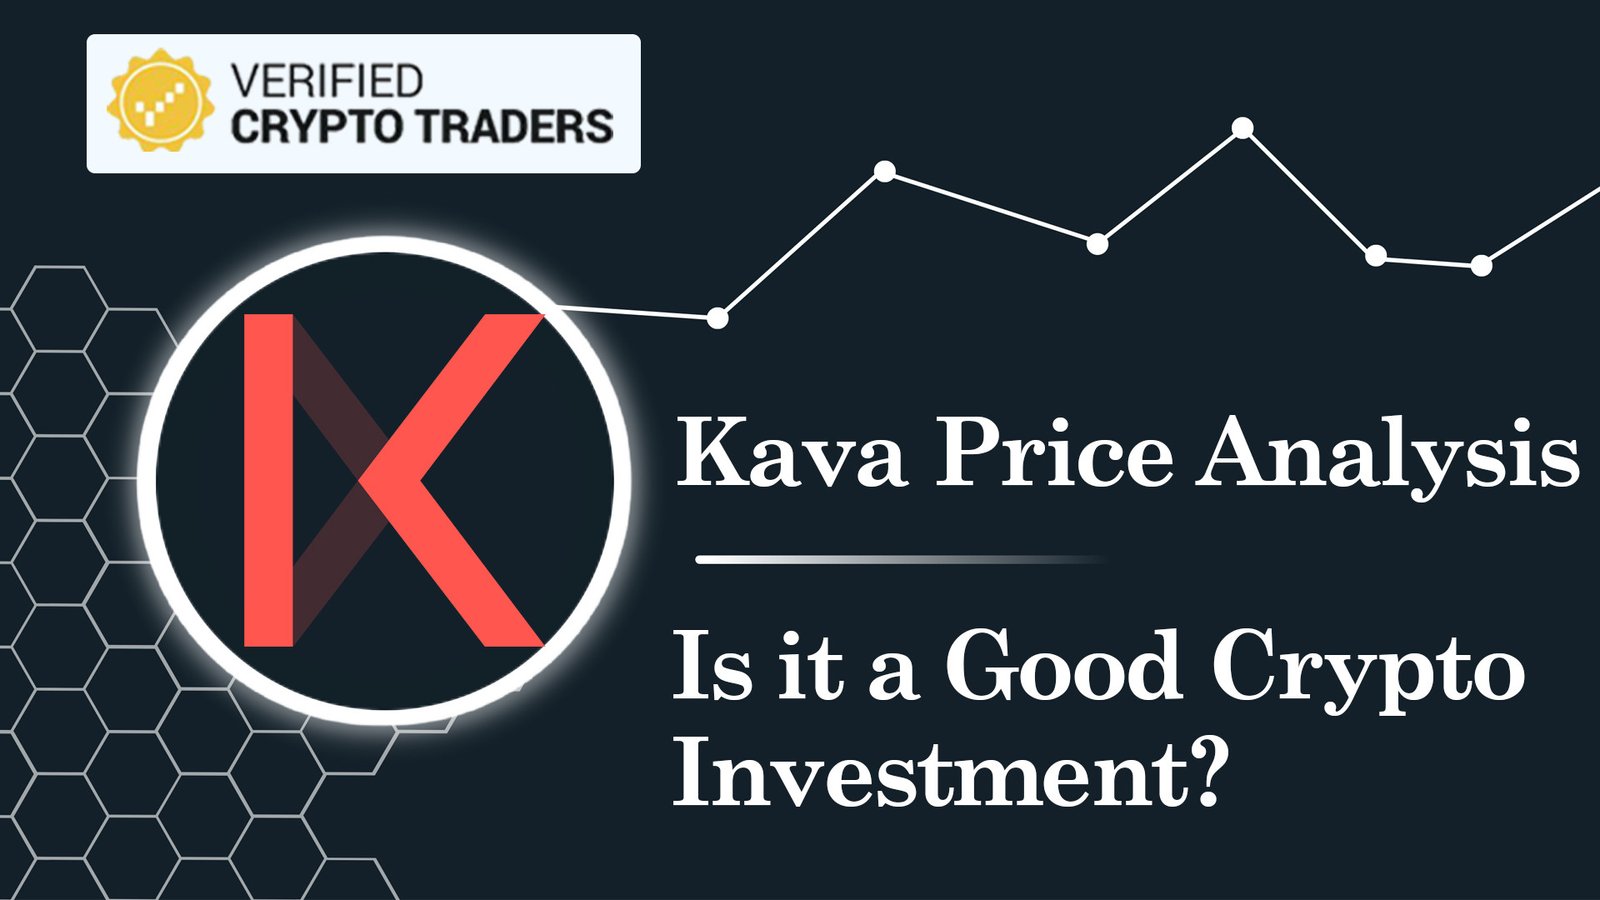 Kava Price Analysis: Is it a Good Crypto Investment?